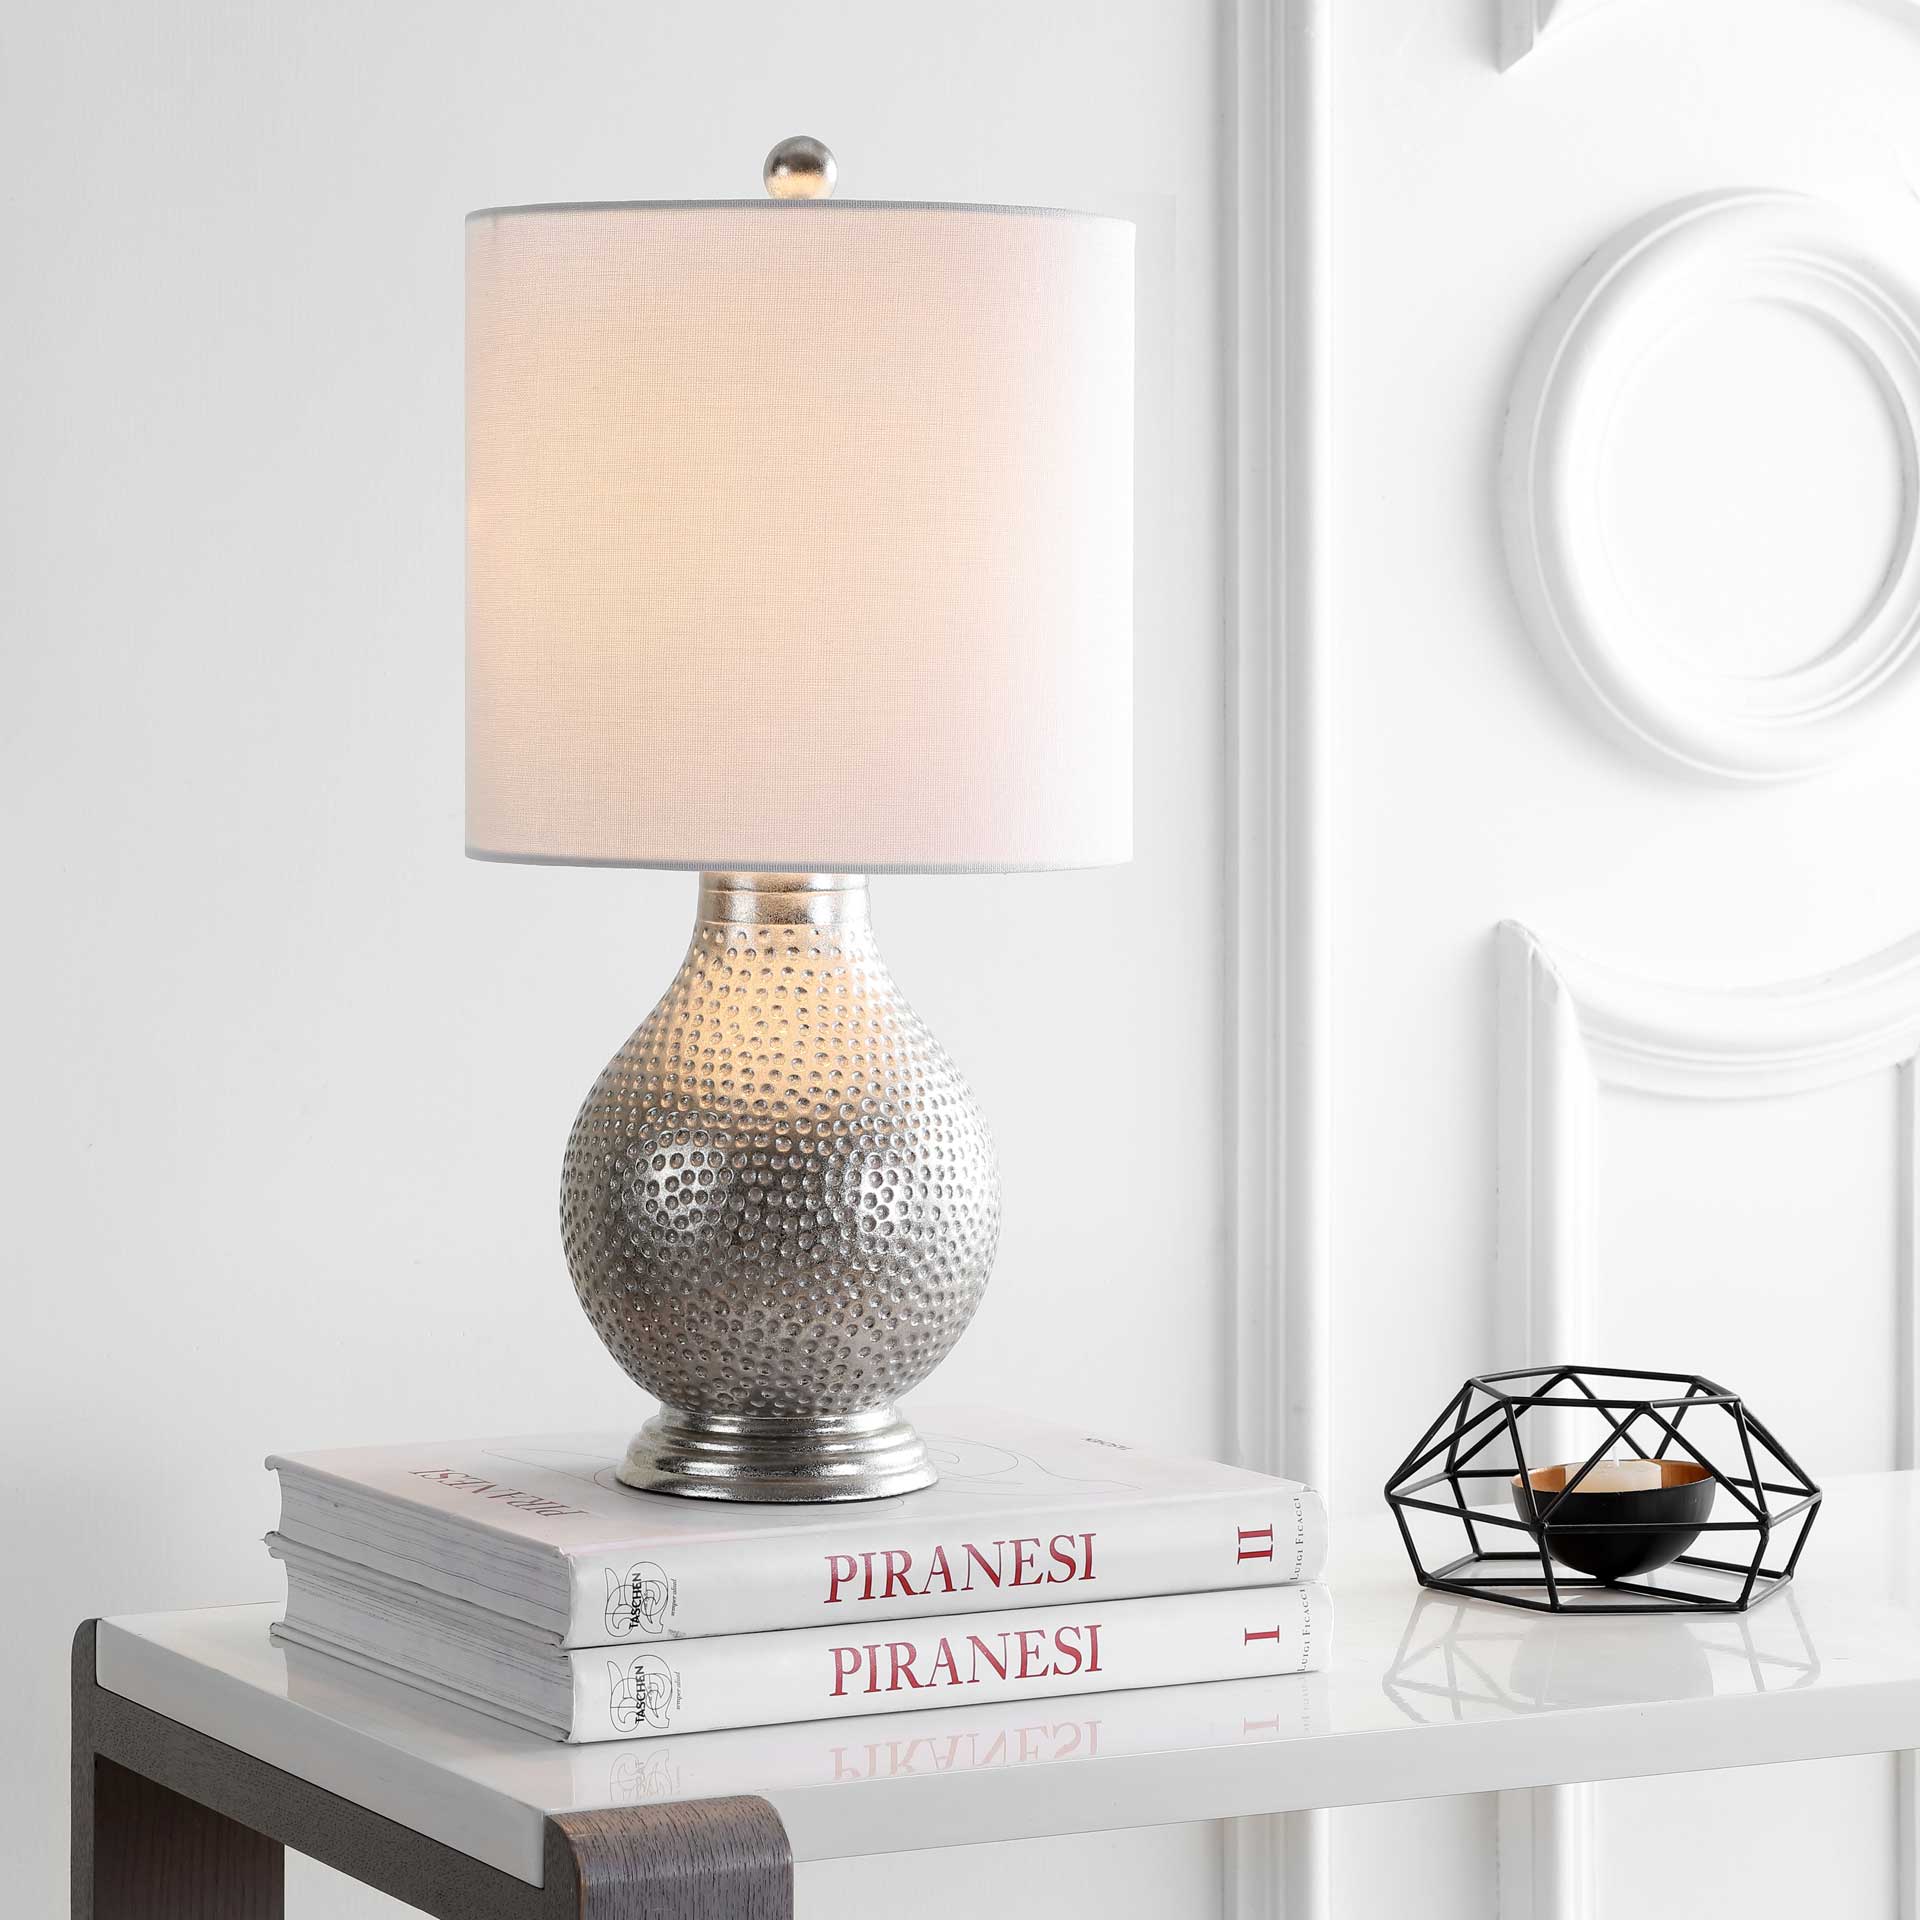 Tellico Table Lamp Silver